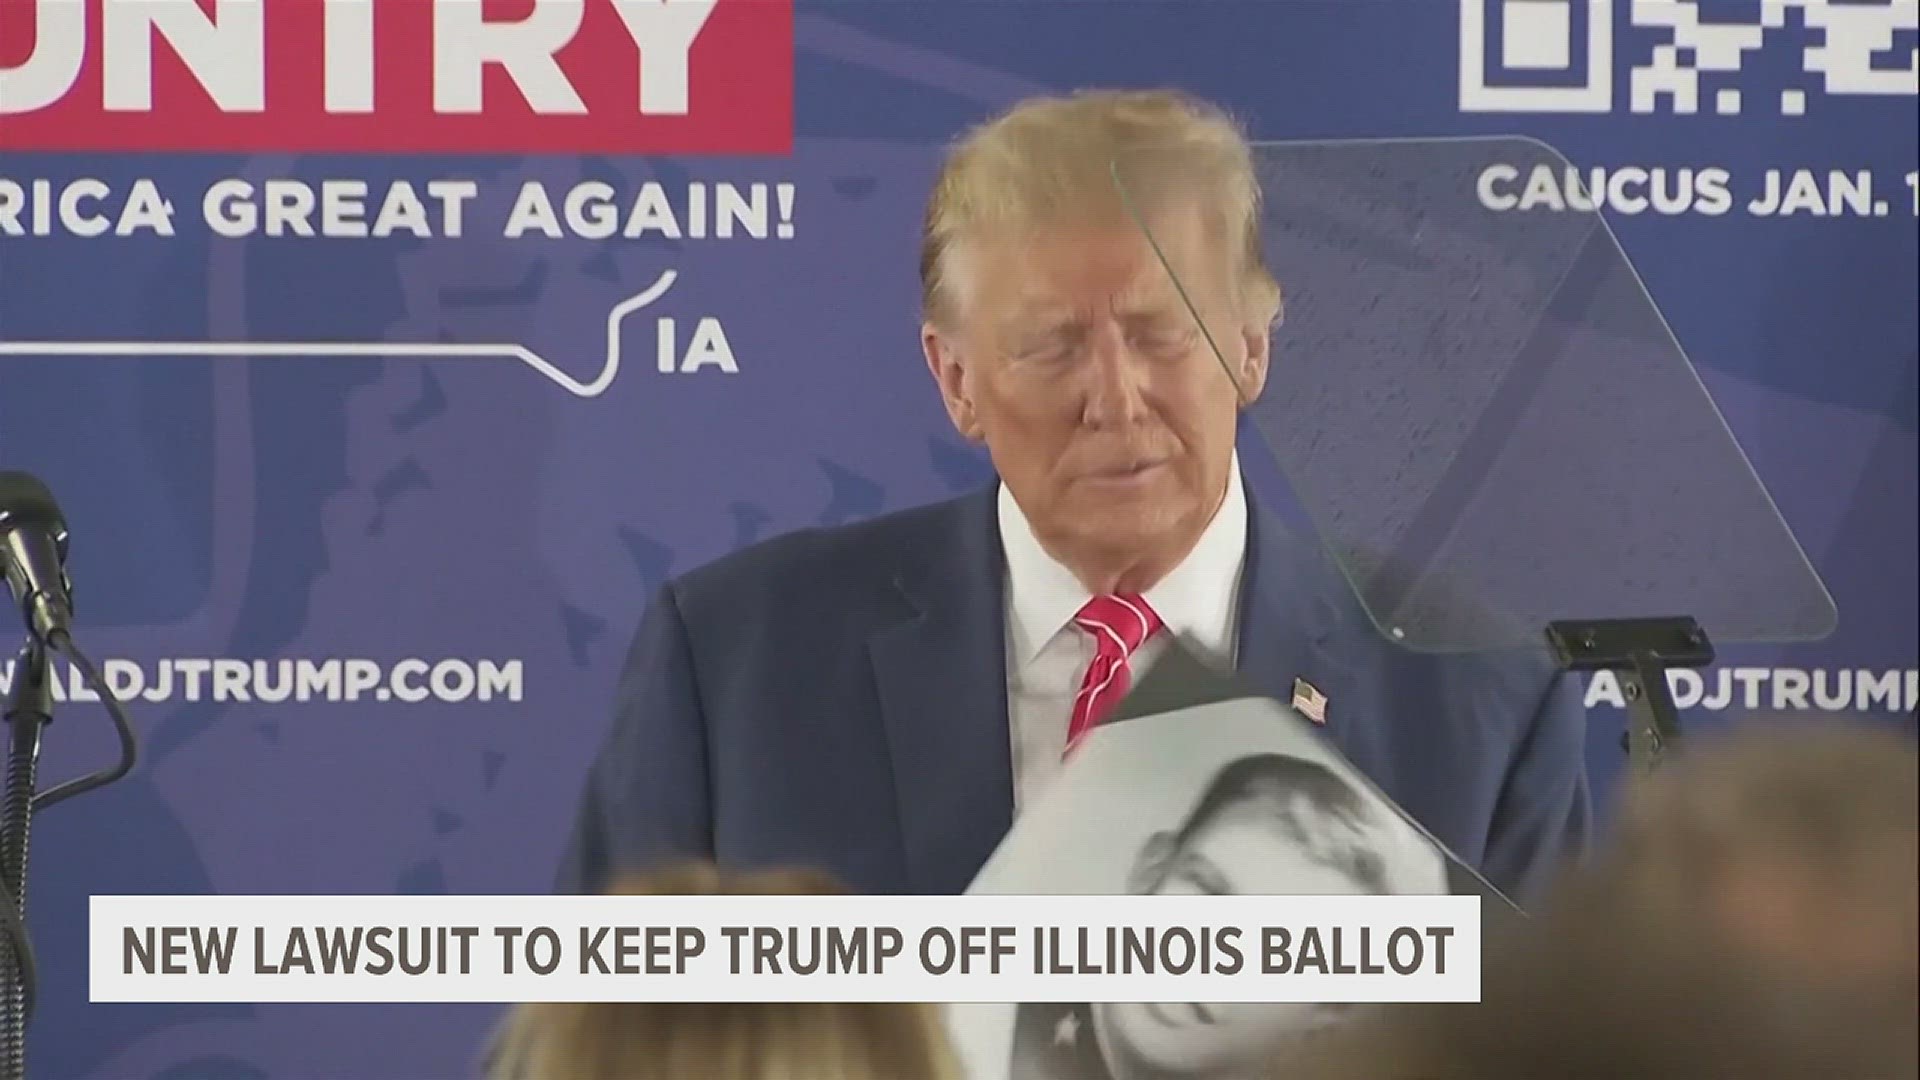 The group filed a lawsuit in a Cook County circuit court Tuesday, hours after Illinois' election board voted to keep Trump on the March 19 ballot.